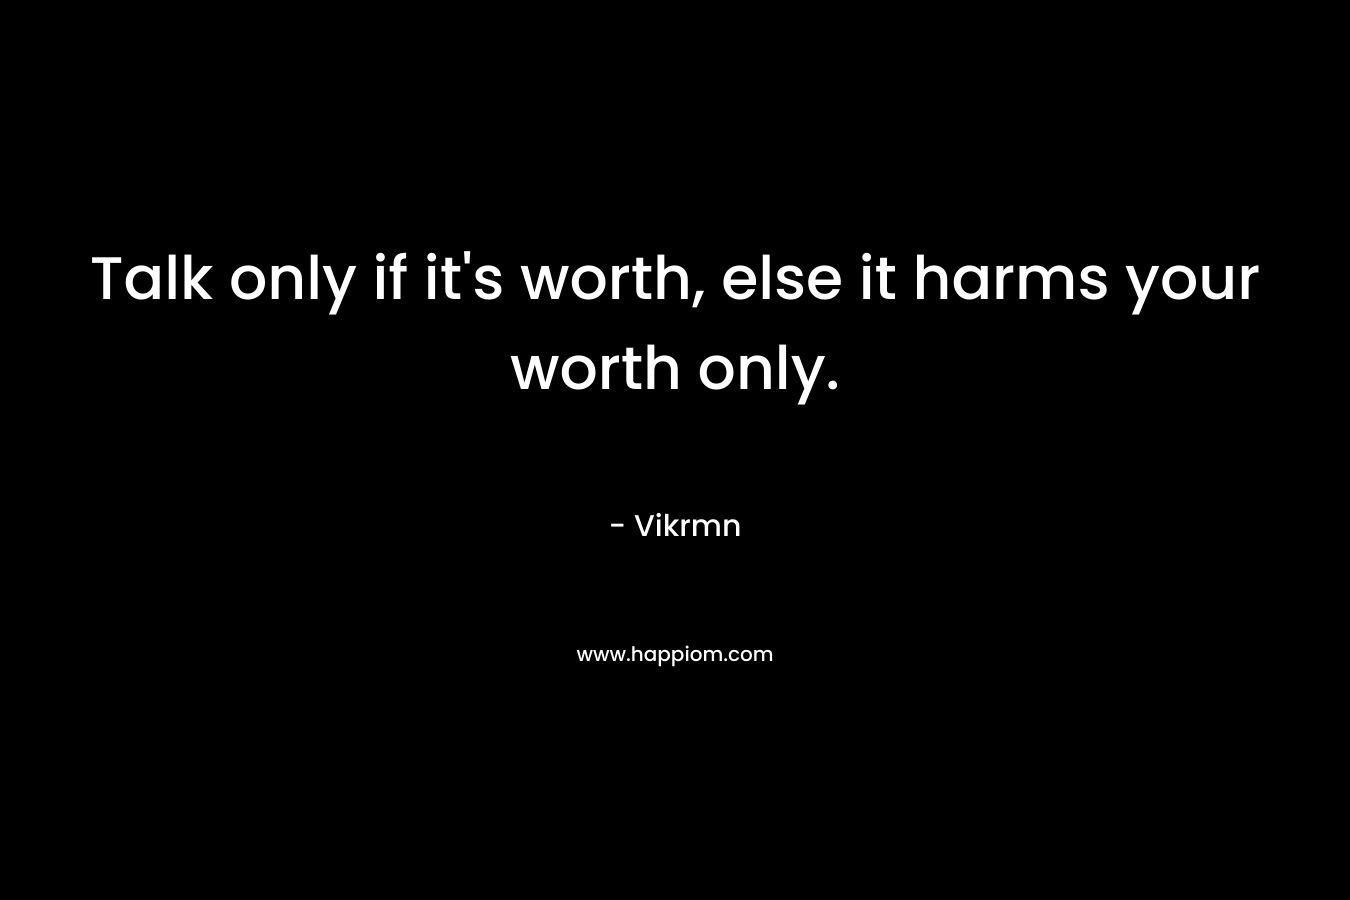 Talk only if it’s worth, else it harms your worth only. – Vikrmn